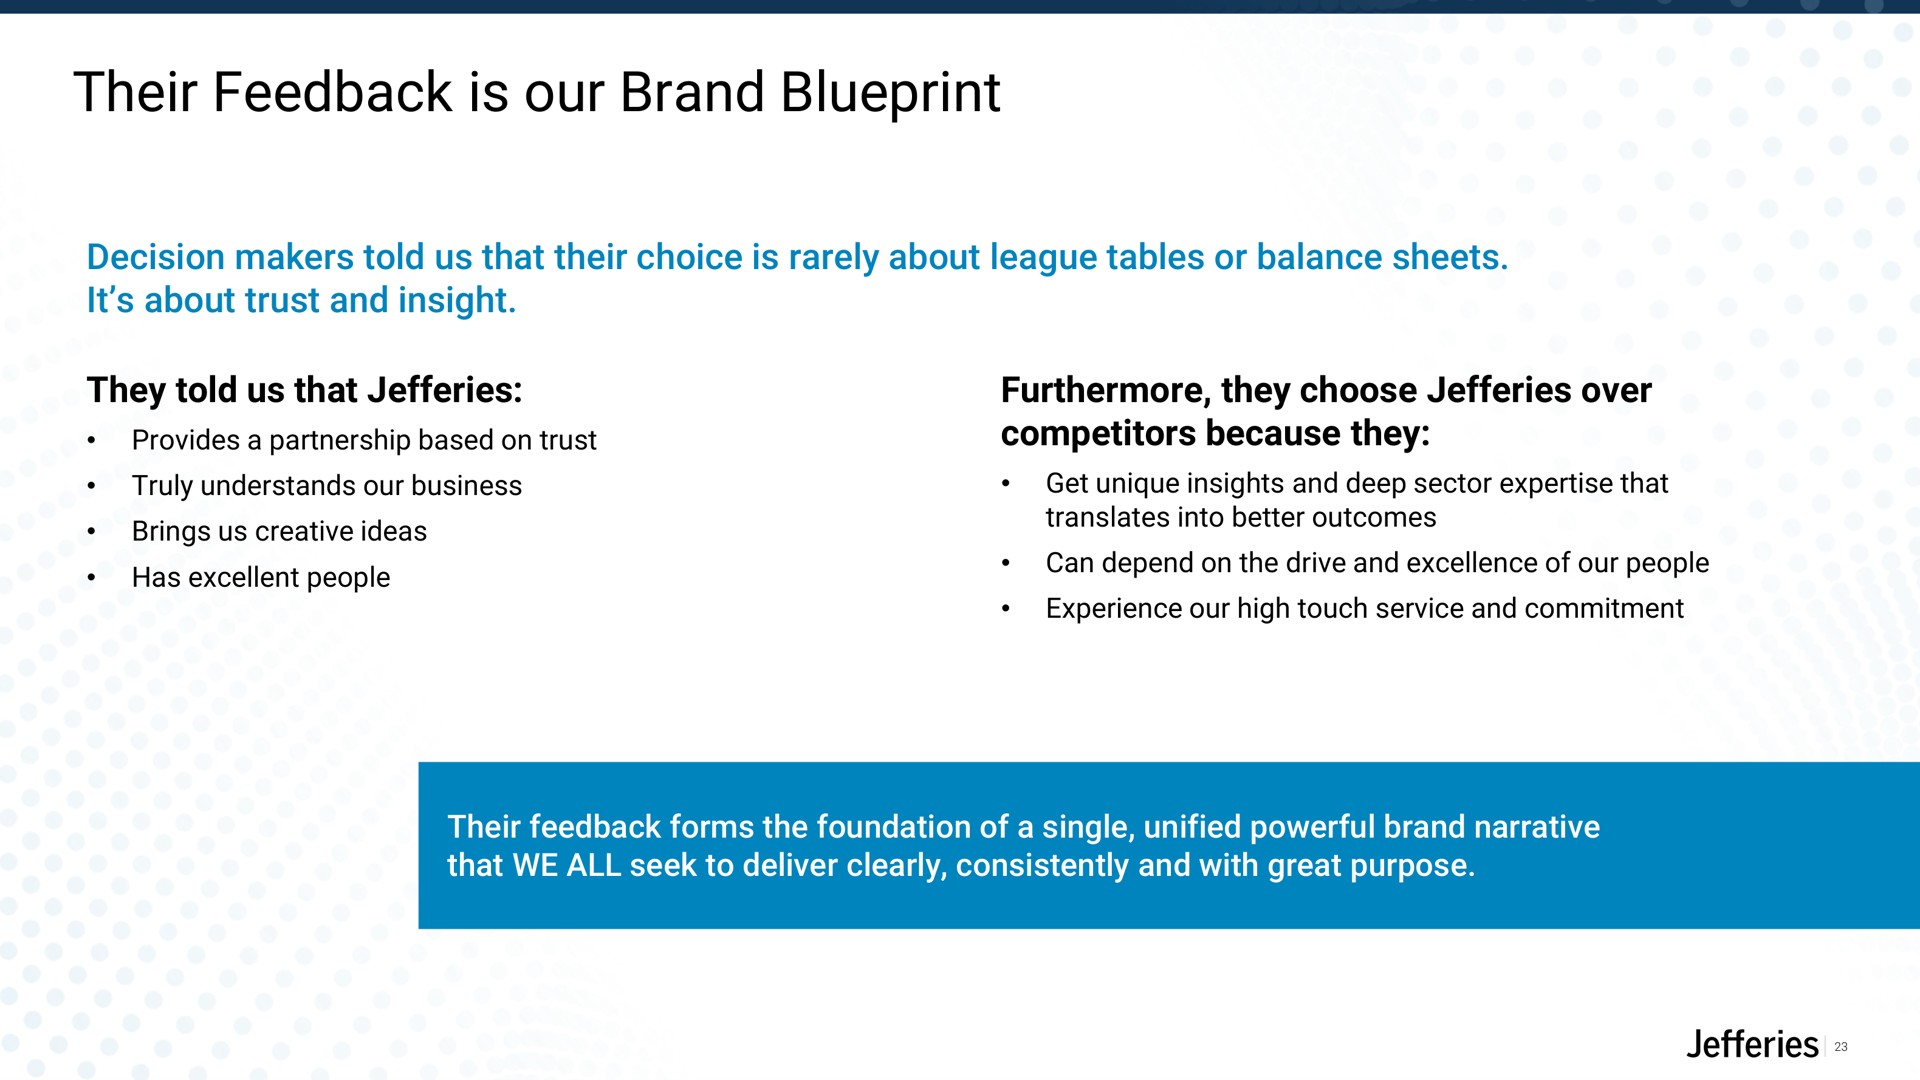 their feedback is our brand blueprint | Jefferies Financial Group